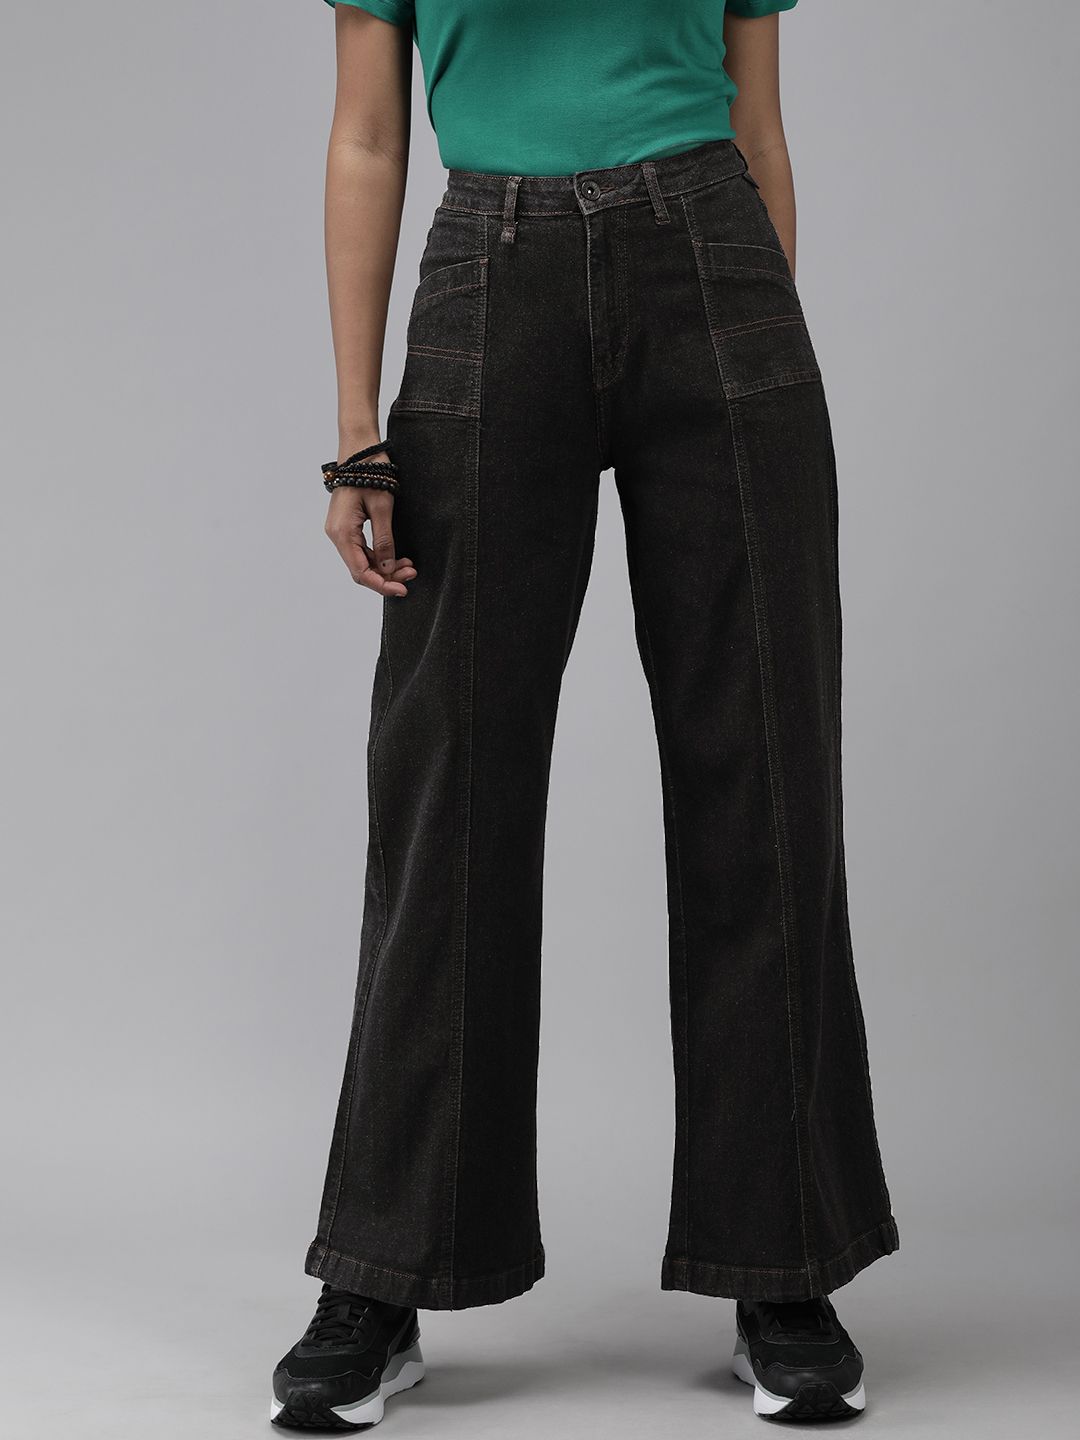 The Roadster Lifestyle Co Women Black Wide Leg High-Rise Light Fade Stretchable Jeans Price in India